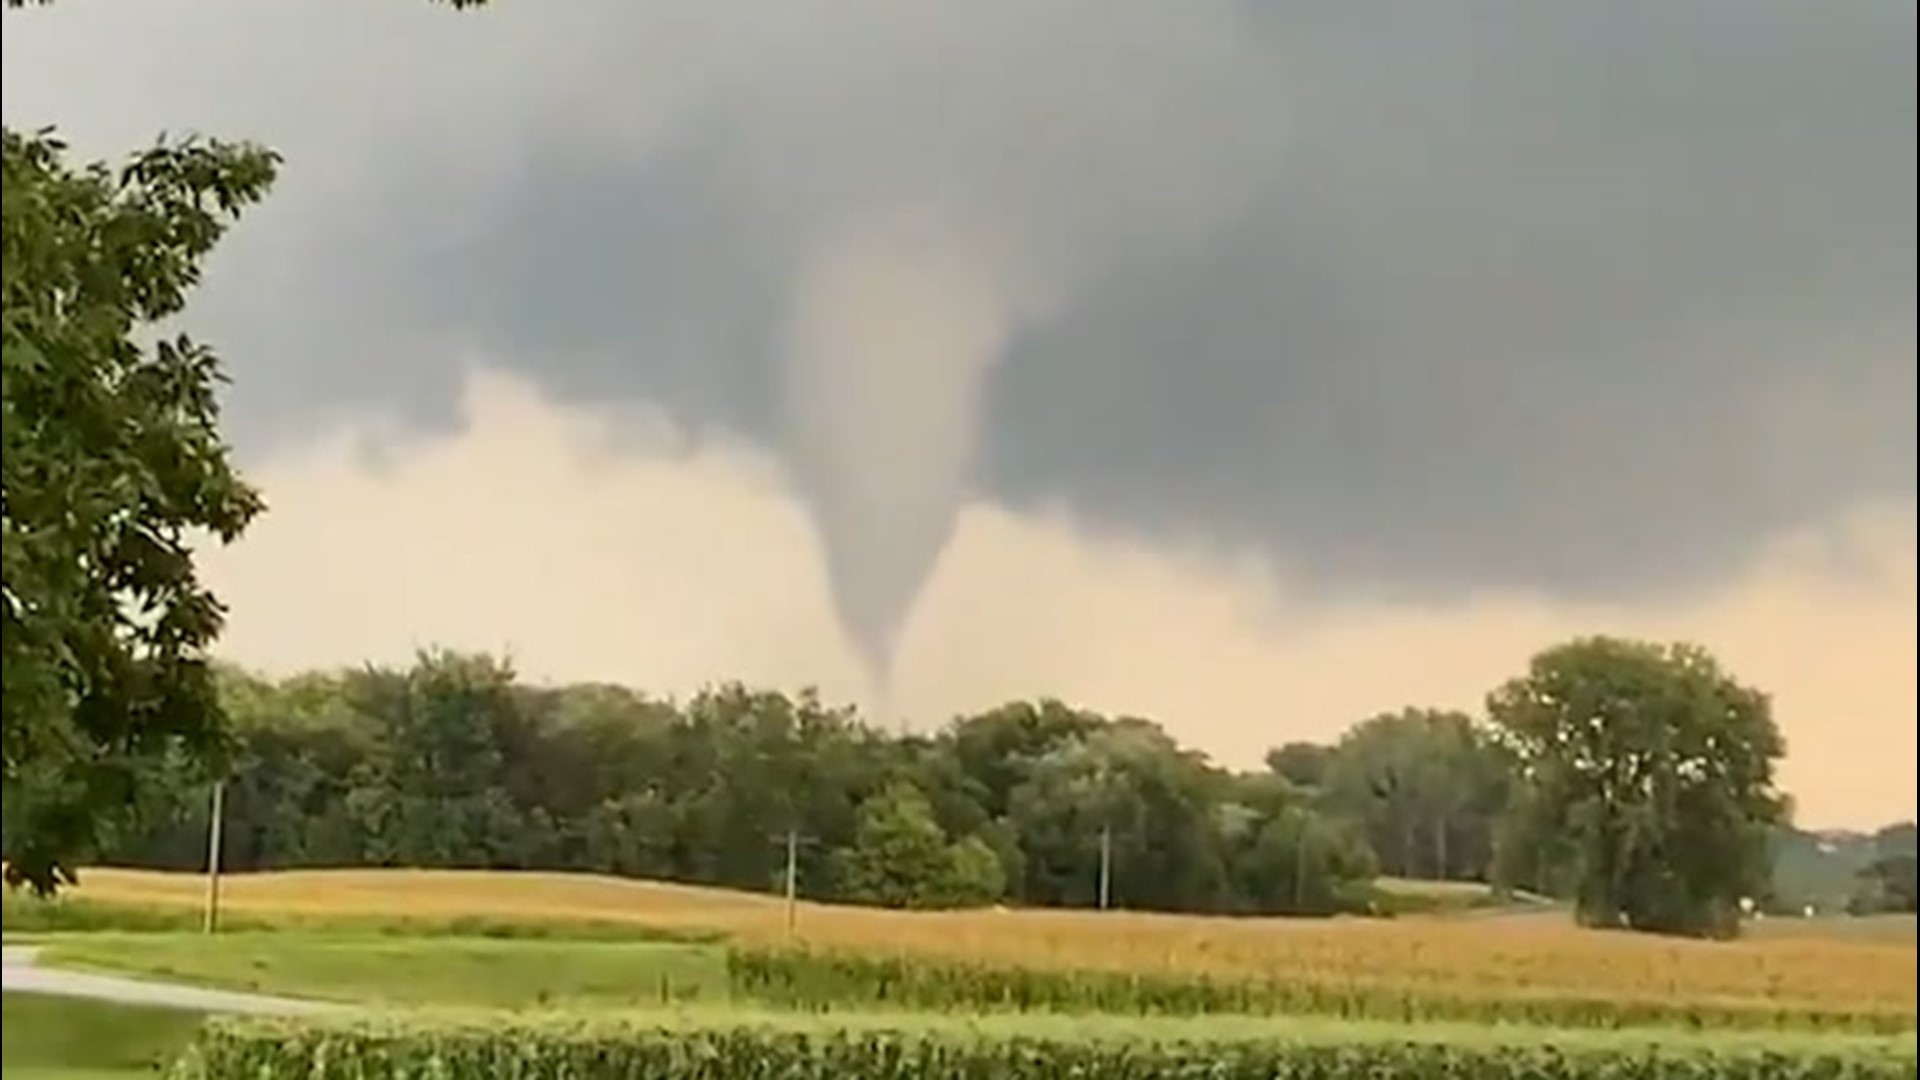 Severe storms brought flooding and funnel clouds to Minnesota on Aug. 14. This one shown is from just north of Brownton, Minnesota.